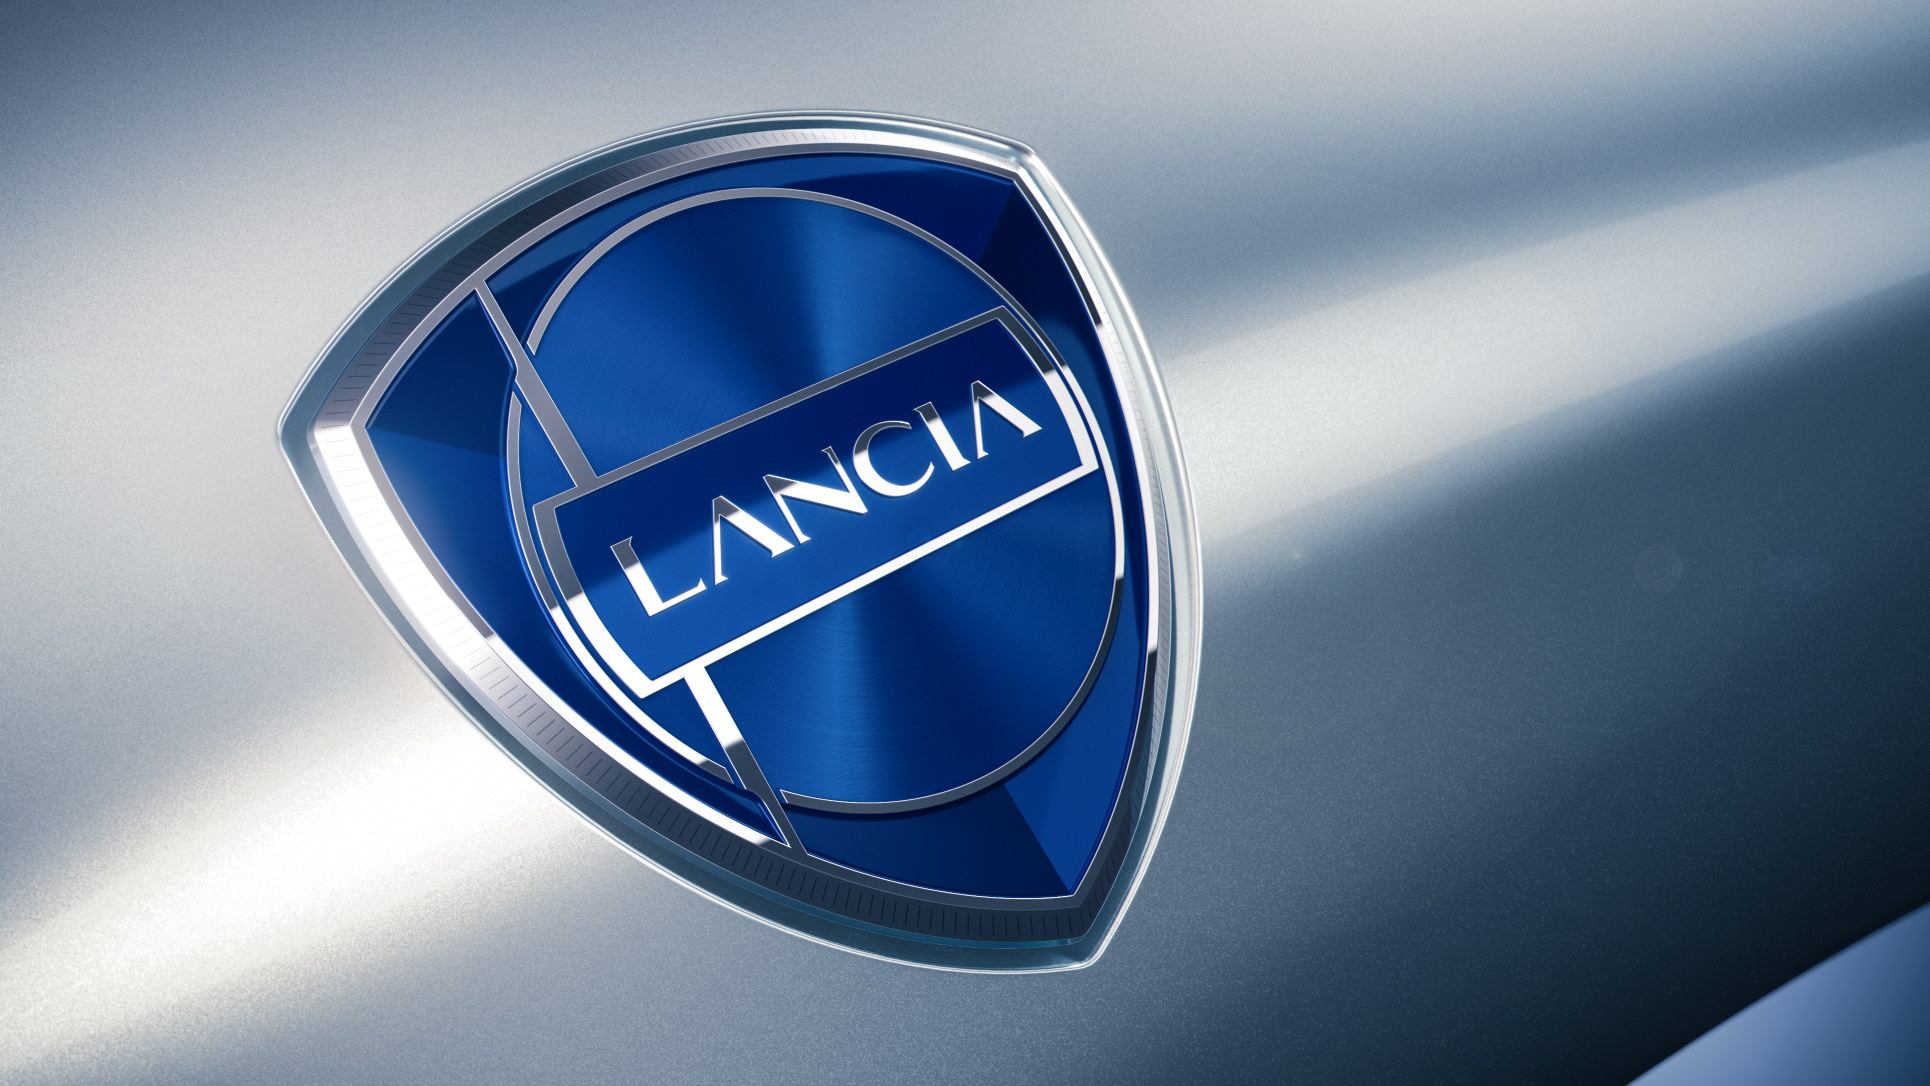 A side angle view of the new Lancia logo in blue.